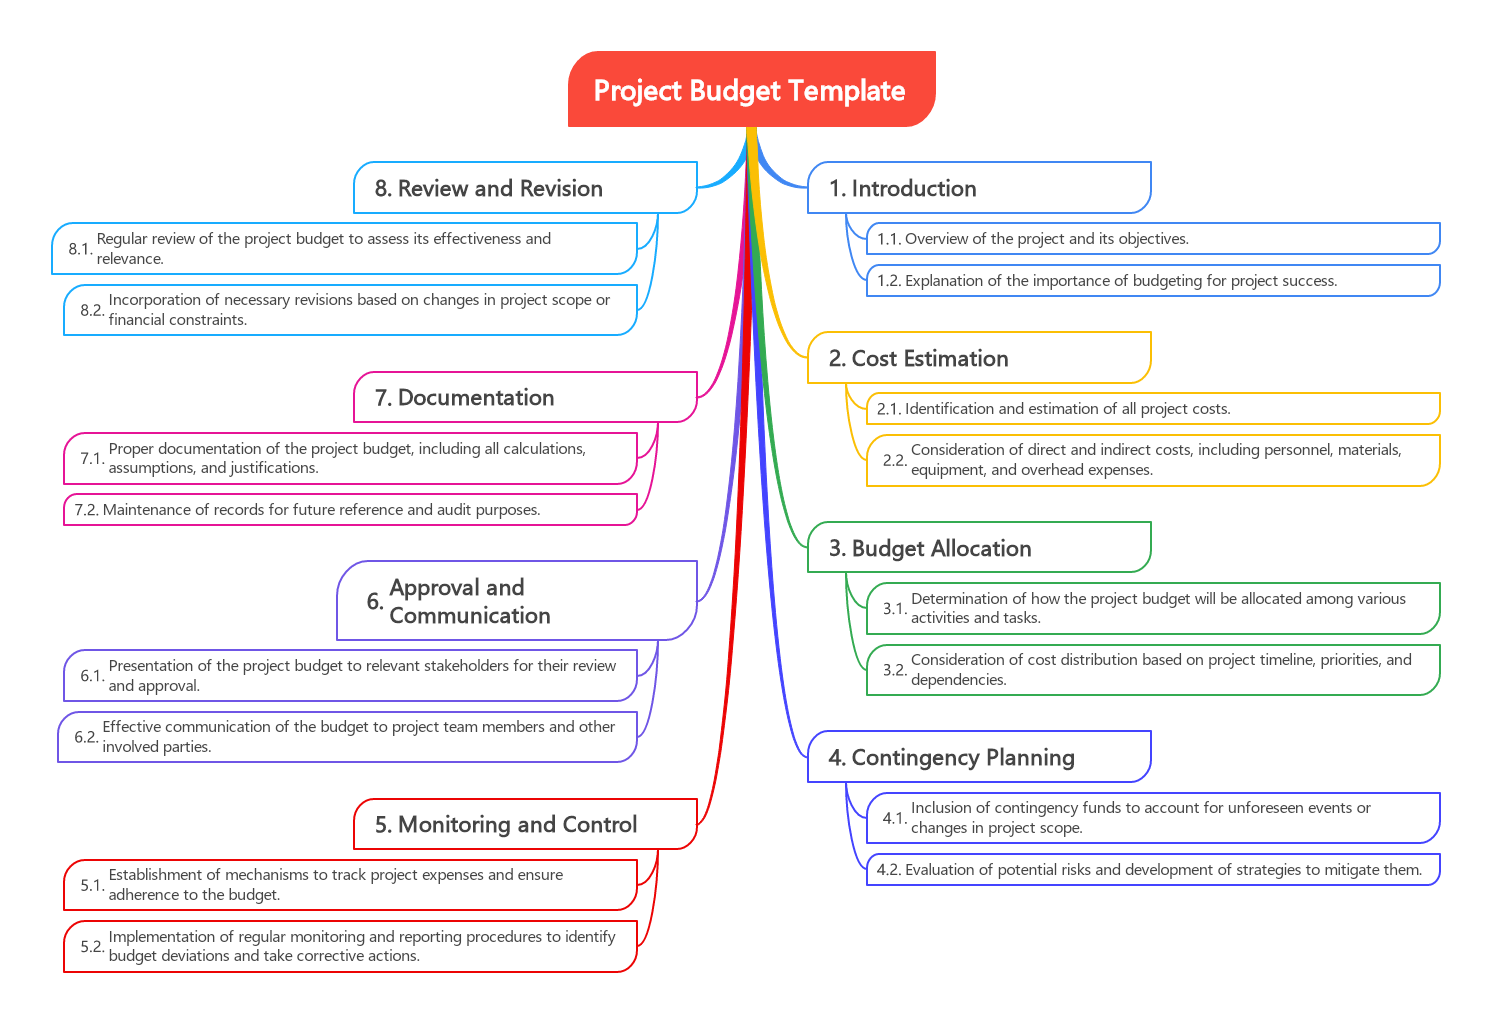 To provide a structured format for creating project budgets & outline the necessary components and considerations for budgeting.